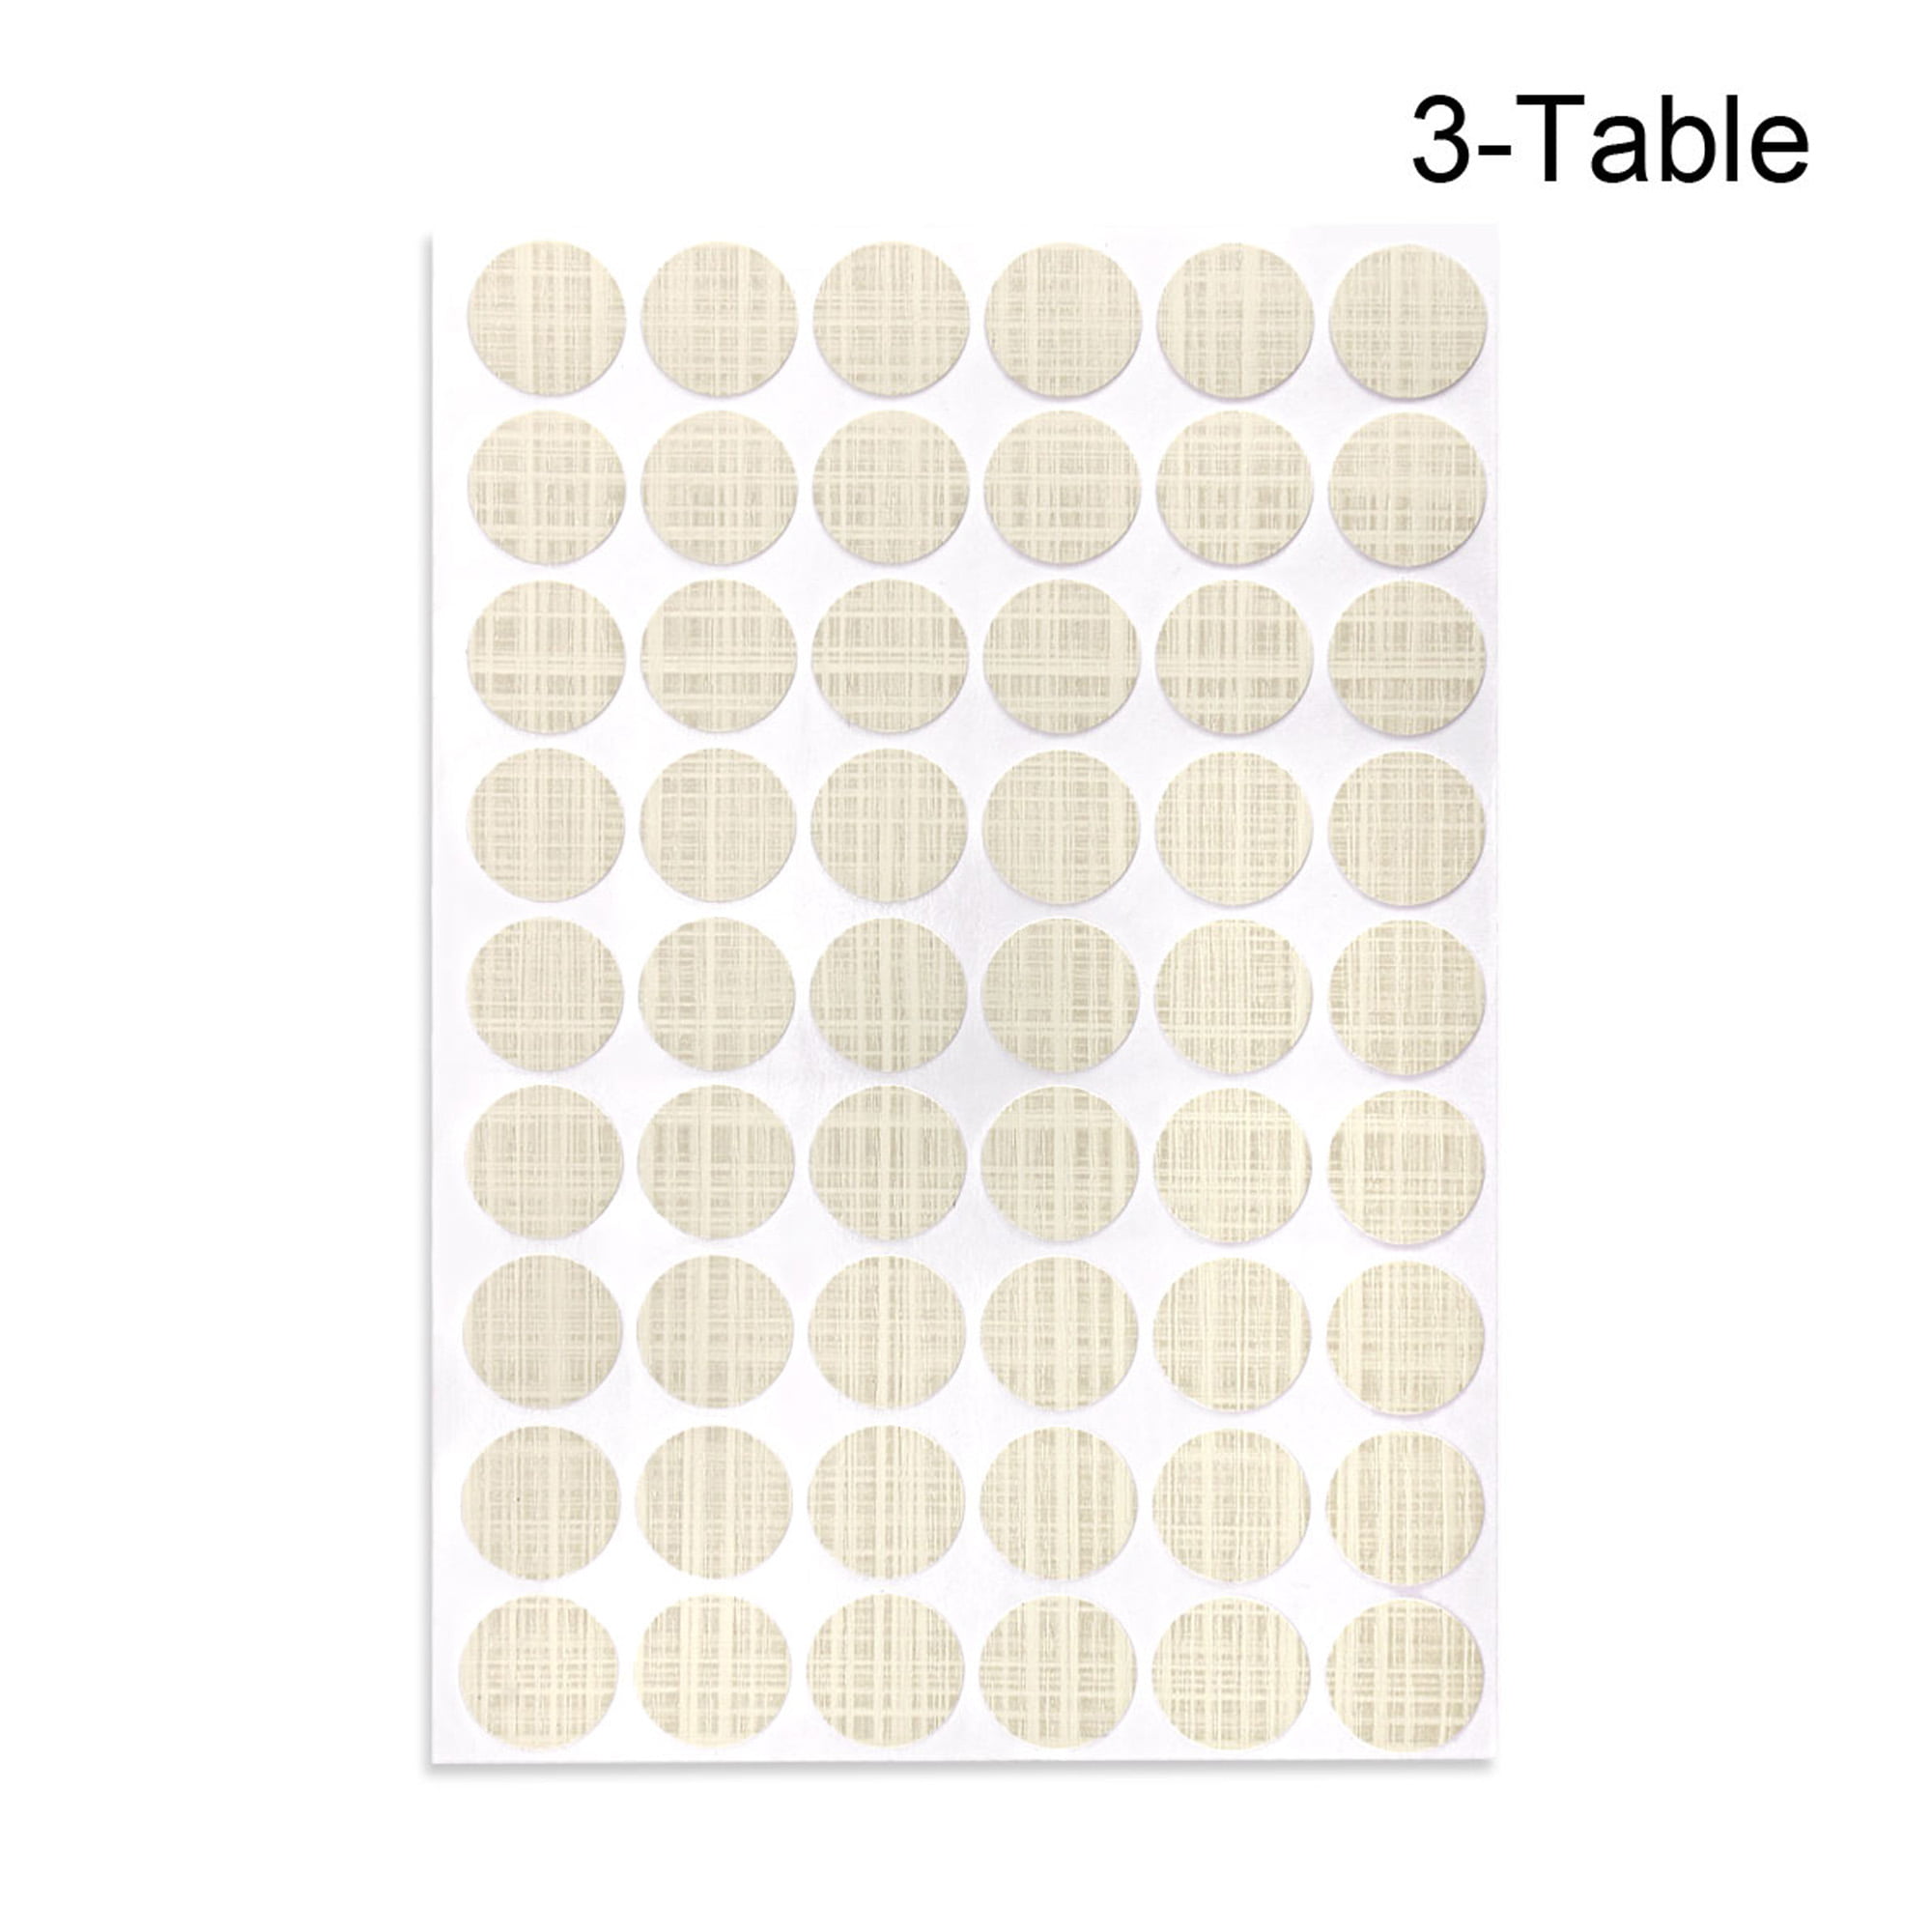 3 Tables Caps Dust Label 21 mm 54 in 1 Light Oak Self-Adhesive Labels with Screw Hole Self-Adhesive Screw caps